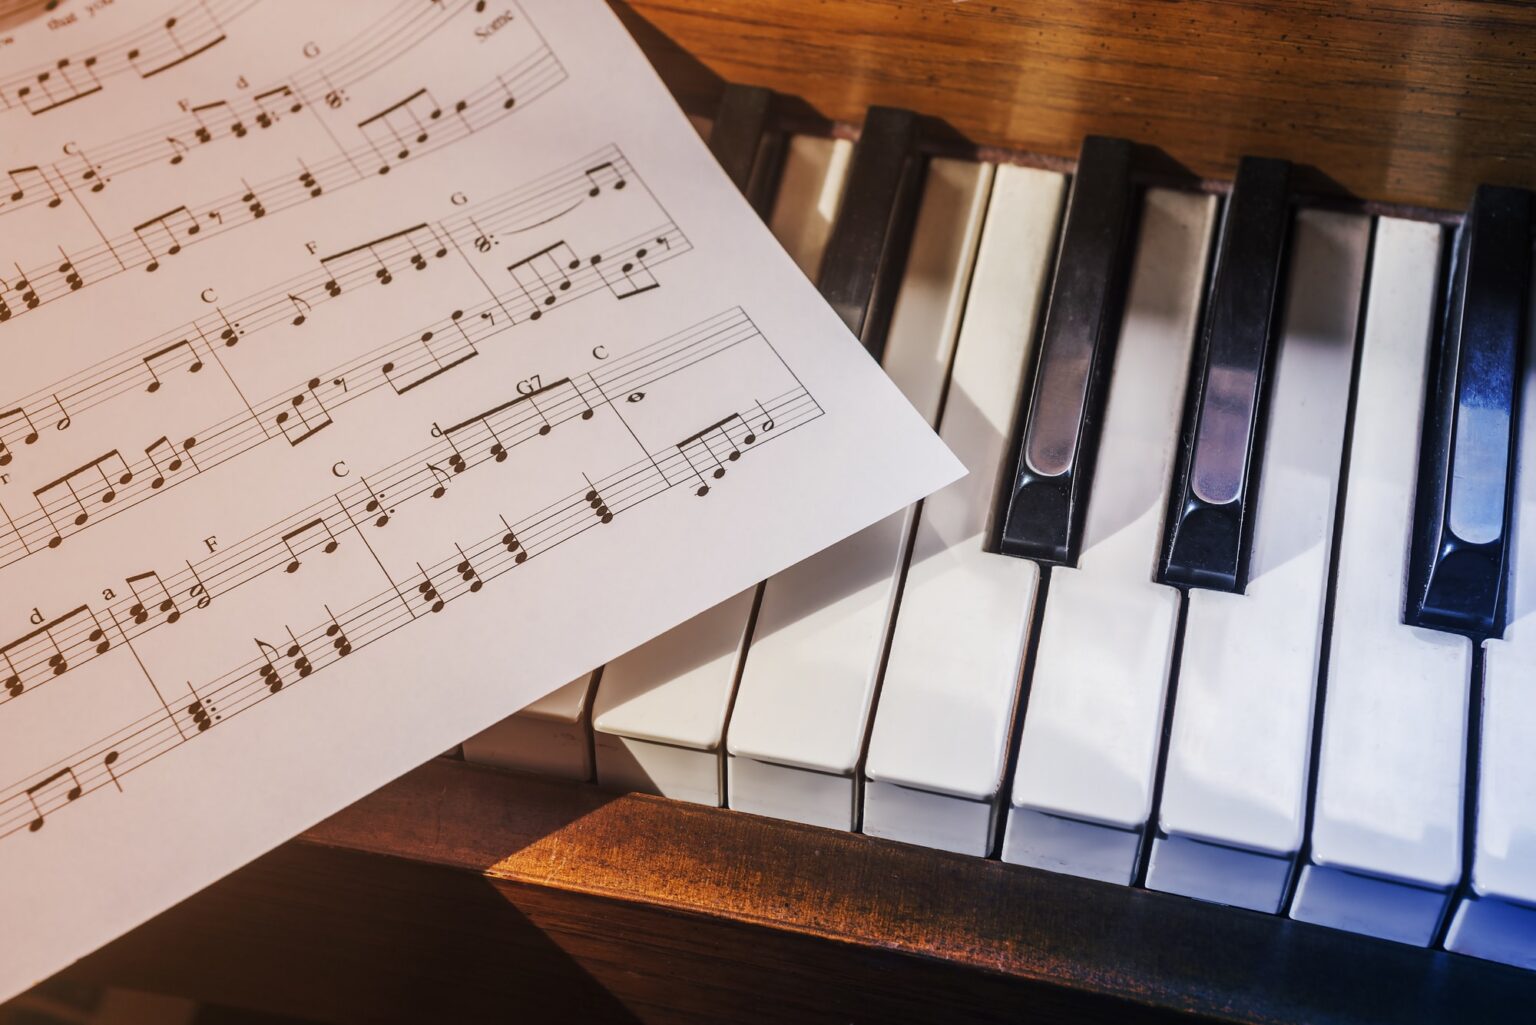 If you need more music in your life, turn to a sheet music transcription service for fresh tunes. Find the best online services listed for you here.